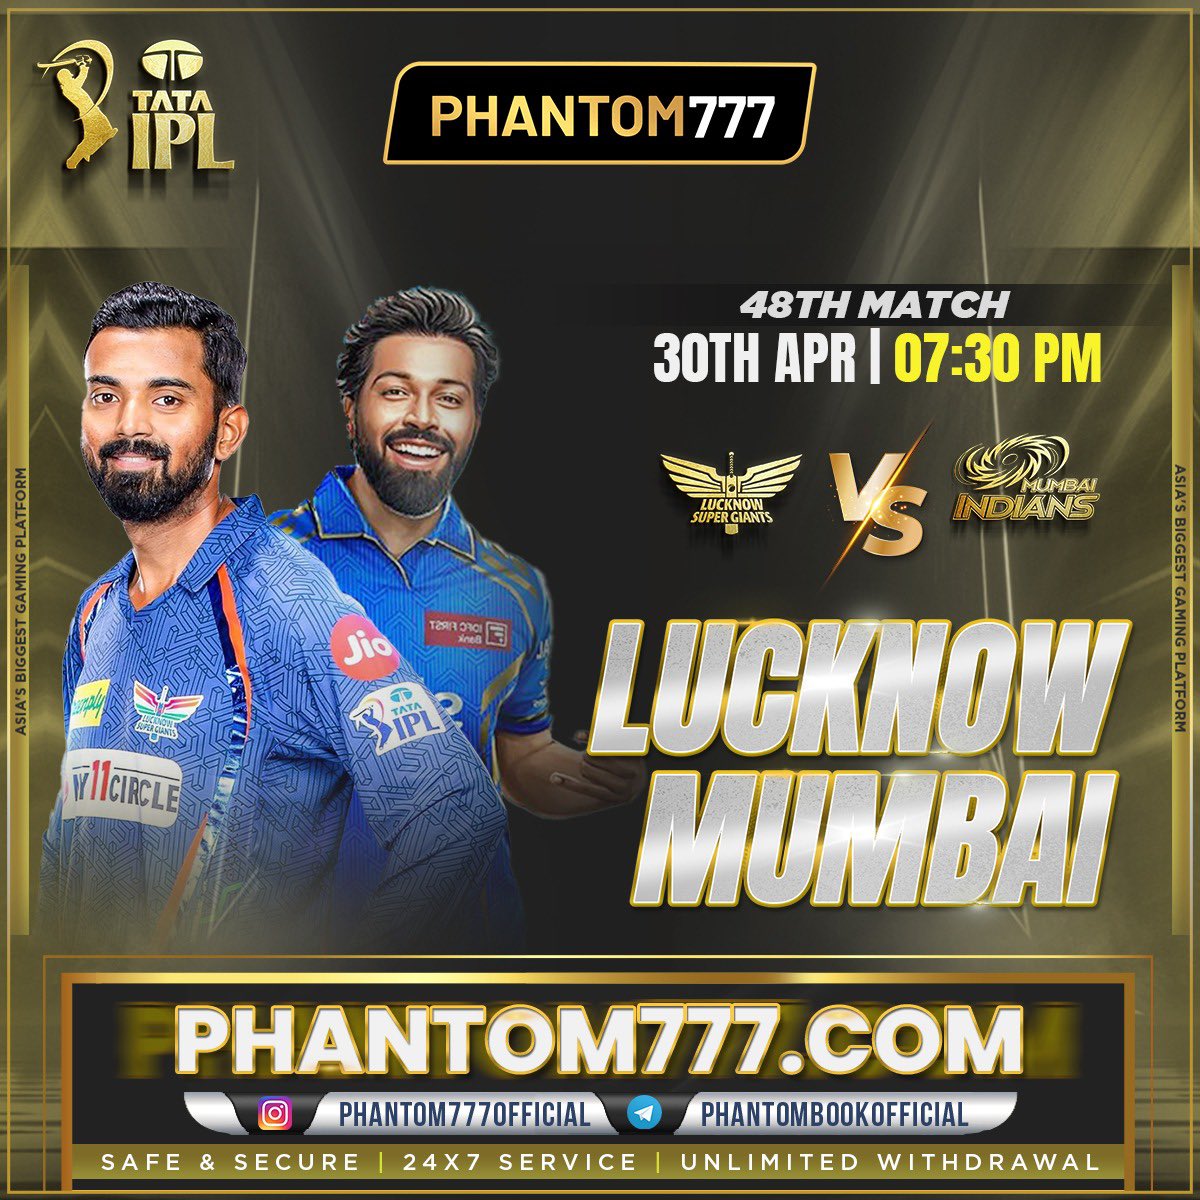 Excited for the intense showdown between Mumbai and Lucknow on Asia's biggest gaming platform! Phantom777 is the place to be for non-stop action. #Phantom777 #Cricket #MumbaivsLucknow